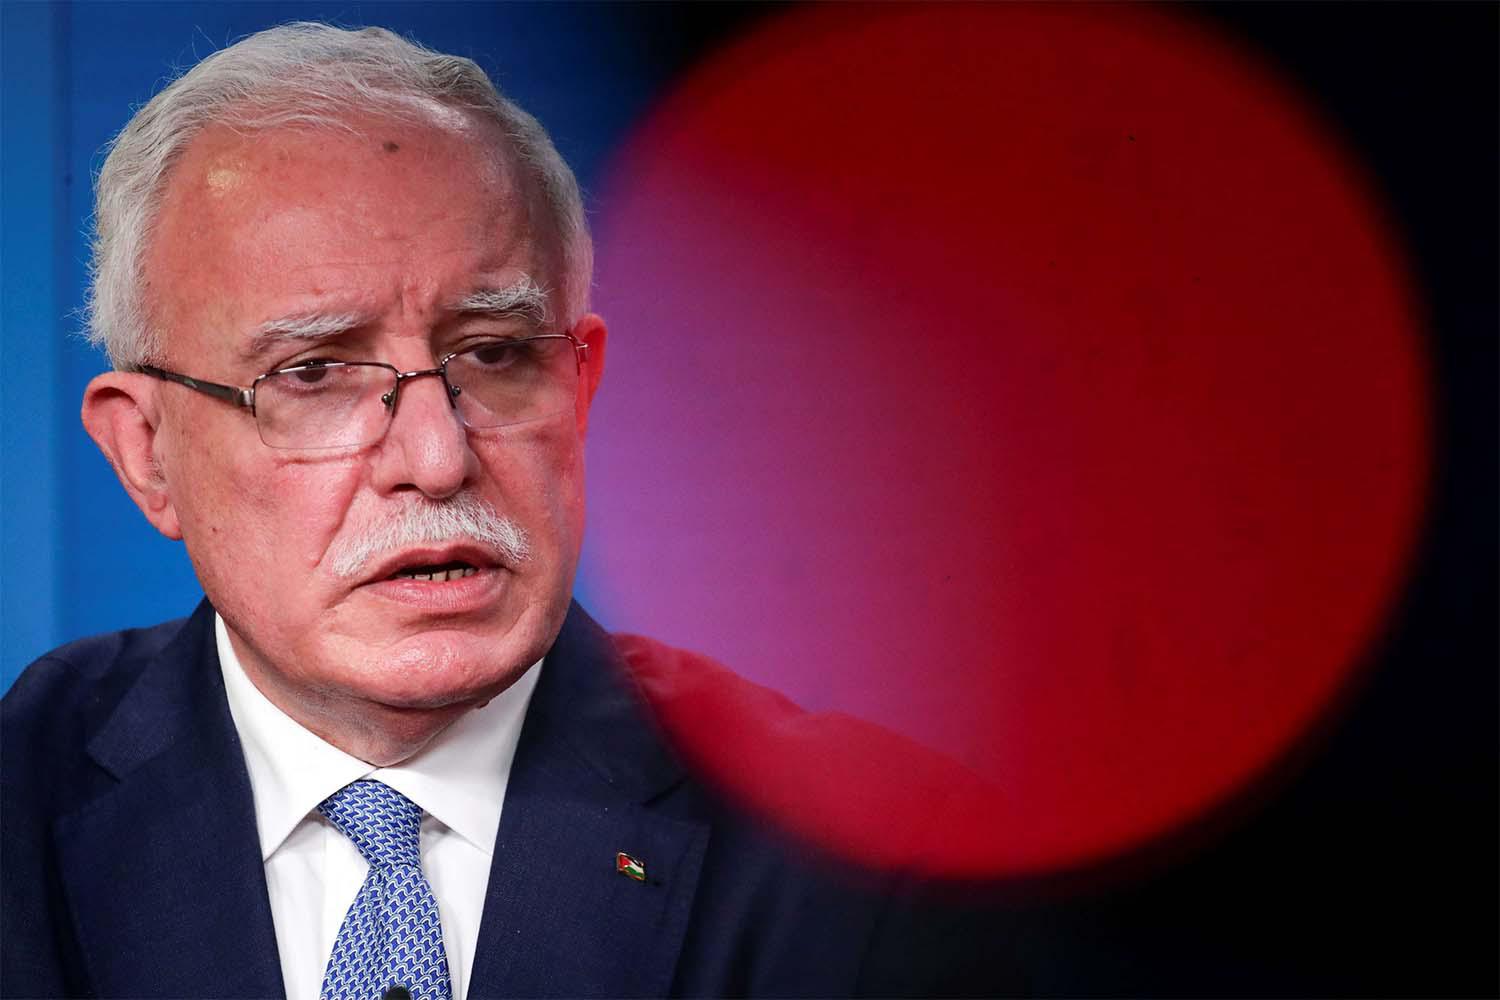 Malki: We are ready for cooperation and dealing with the new US administration